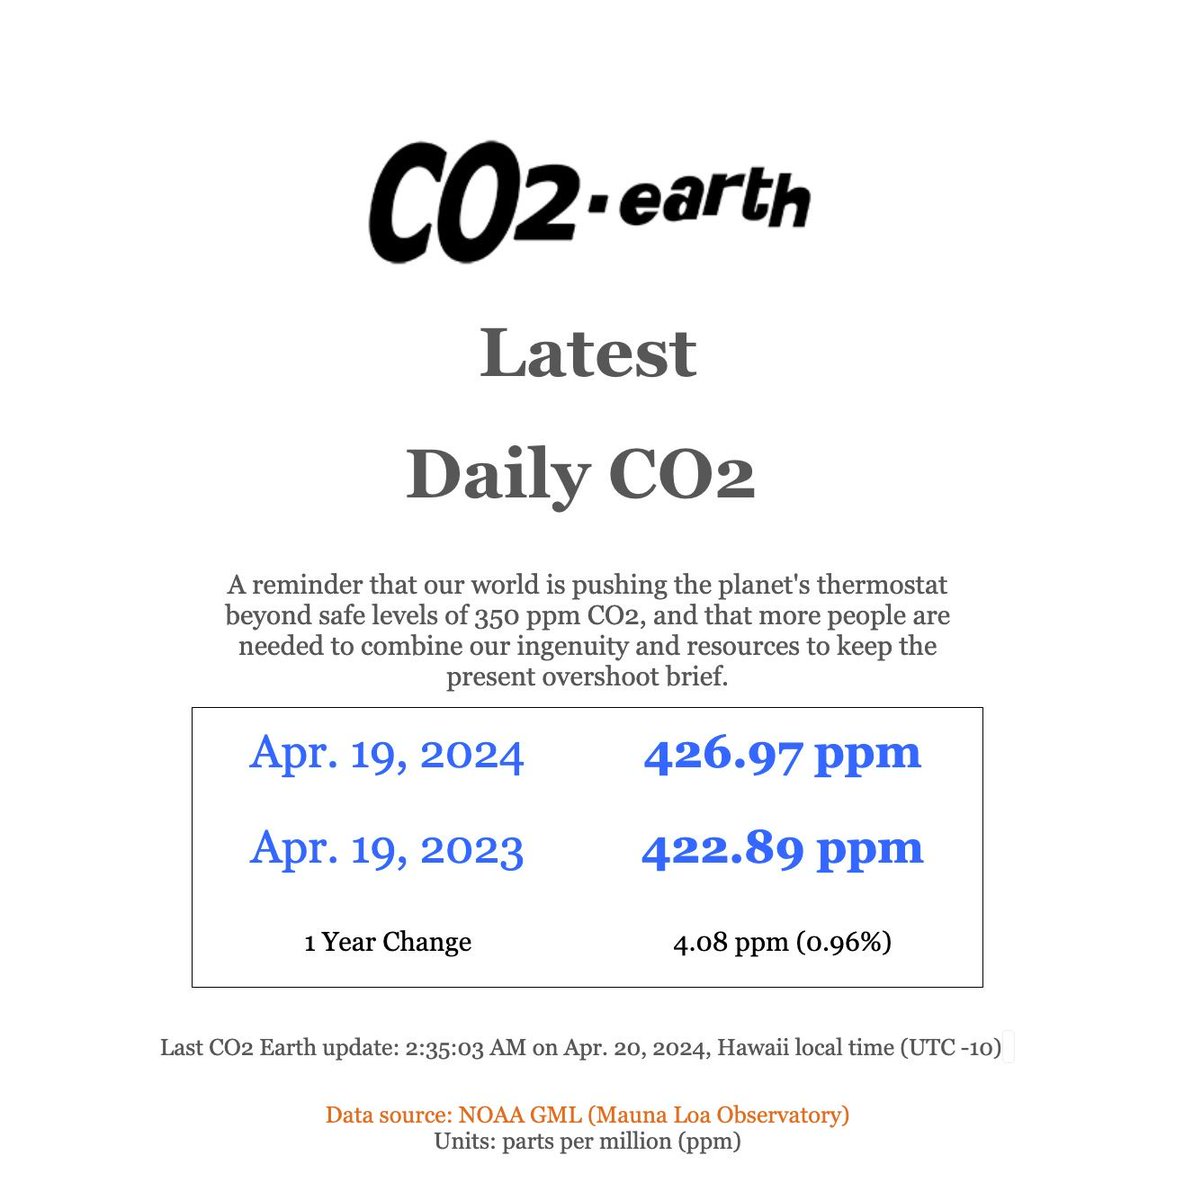 🌎📈 426.97 ppm #CO2 in the atmosphere on Apr. 19 2024 📈 Up 4.08 from 422.89 ppm one year ago 📈🌎 @NOAA Mauna Loa data: gml.noaa.gov/ccgg/trends/mo… 🌎 CO2.Earth Daily: co2.earth/daily-co2 🌎 🙏 Please help keep this 350 overshoot brief 🙏